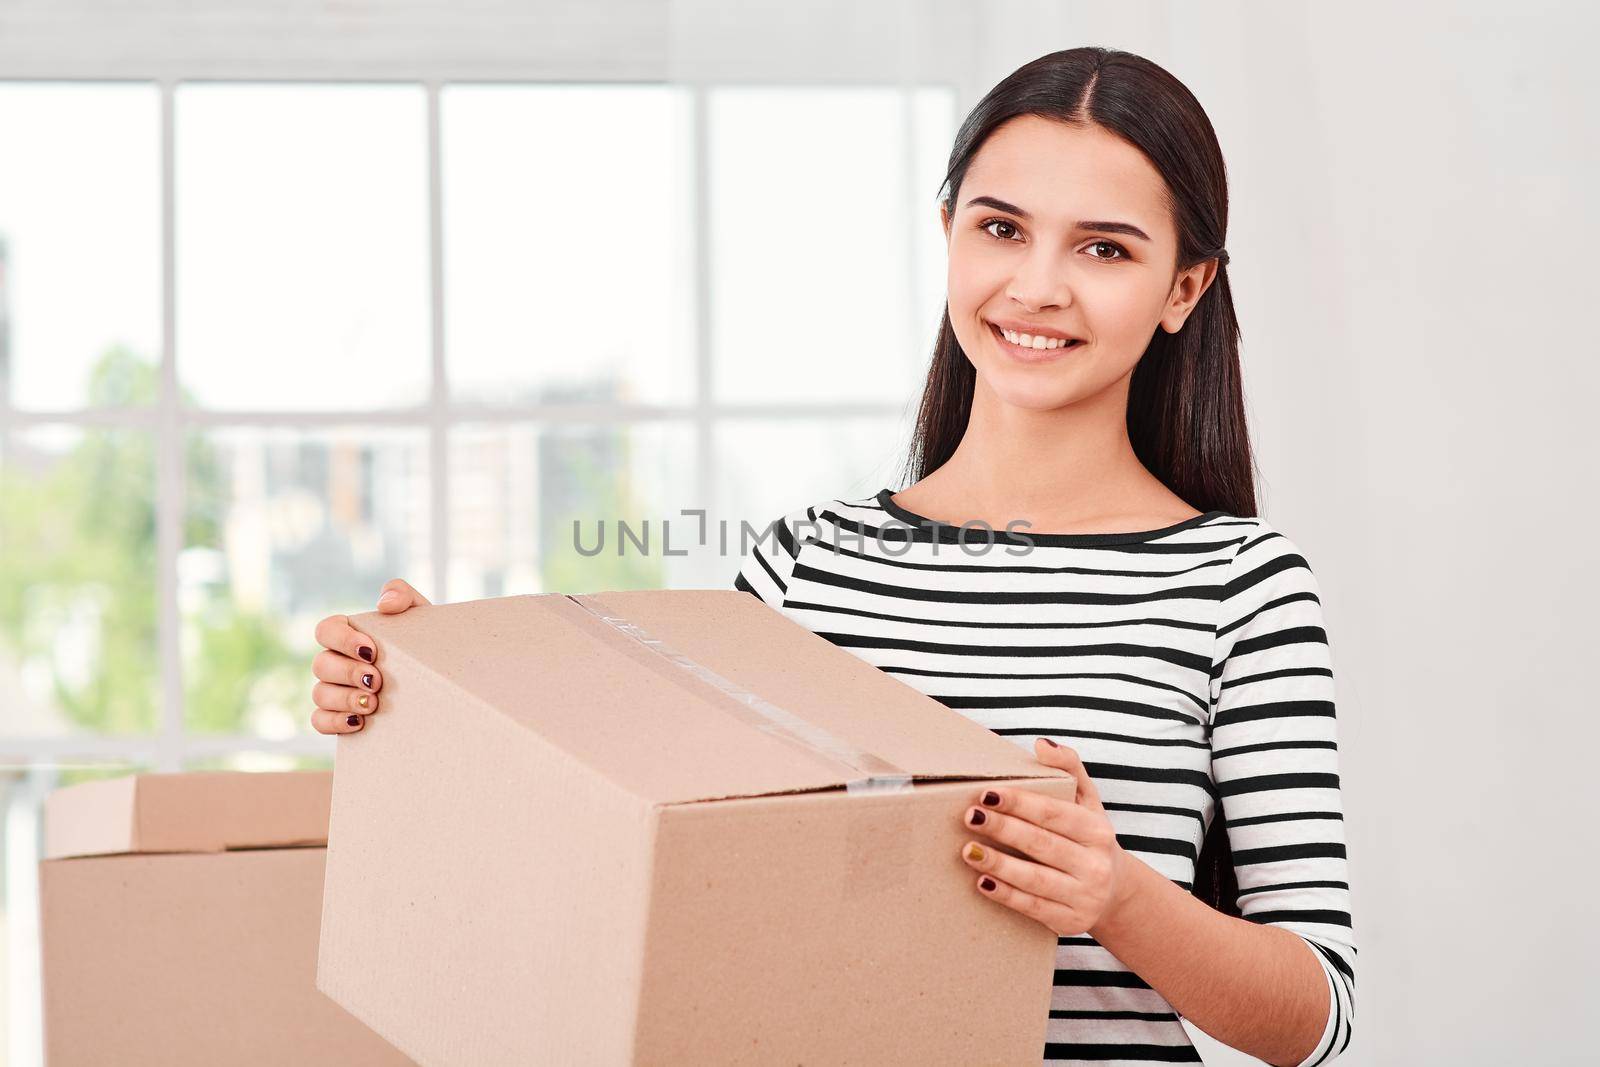 Young entrepreneur, SME, freelance woman working online with clients making purchases, orders. She is preparing packages. Woman standing near boxes and looking at the camera with a smile. Concept of success